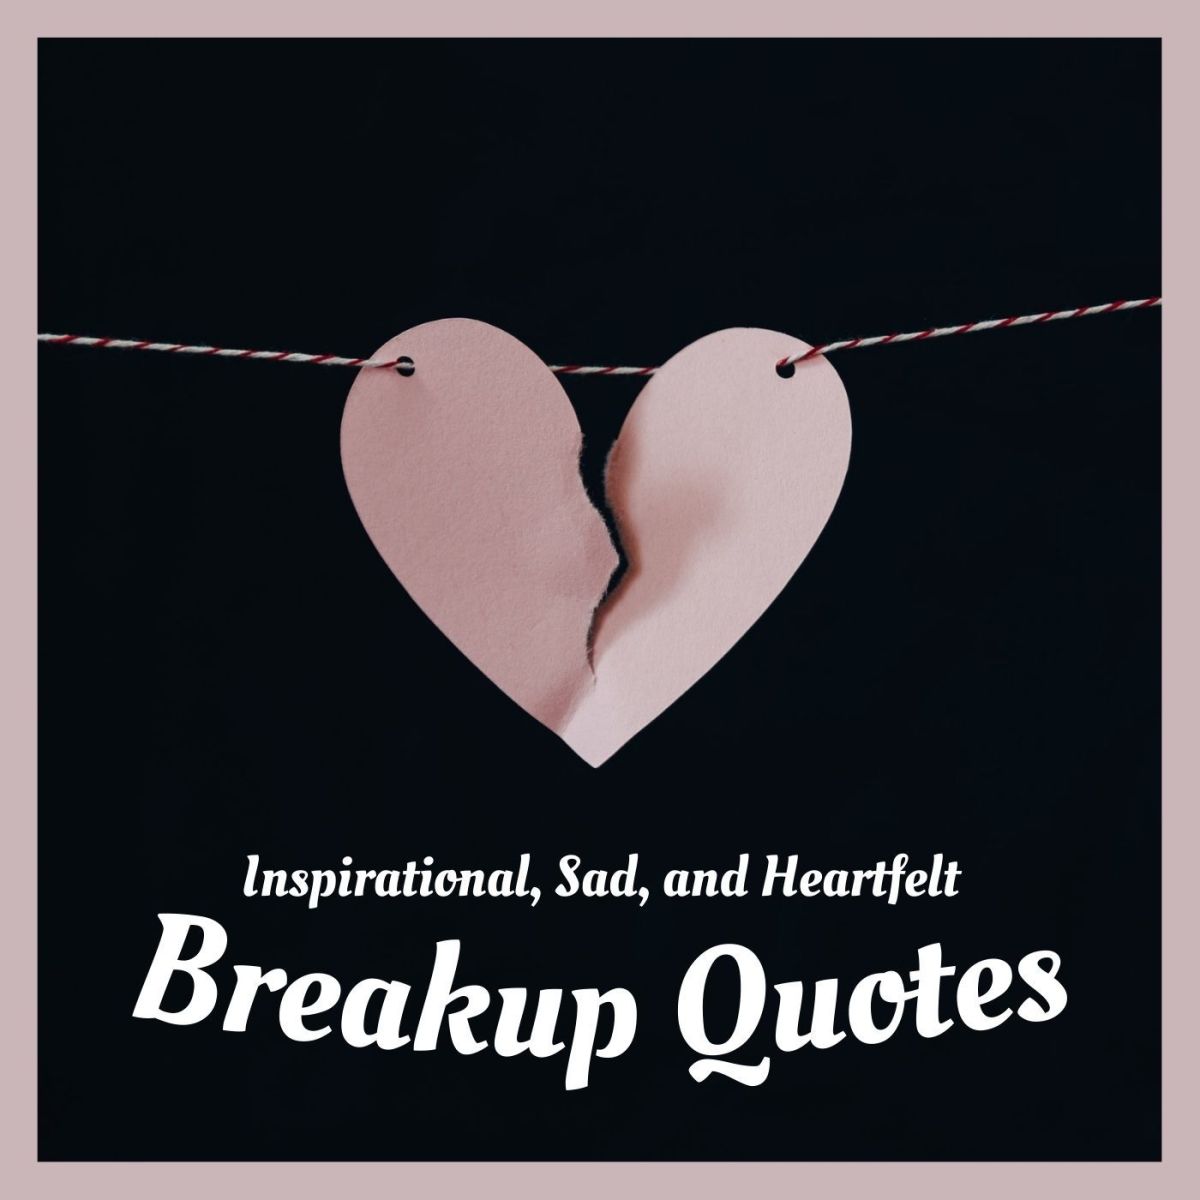 Sad, Inspirational, Motivational, Angry, and Heartfelt Breakup Quotes